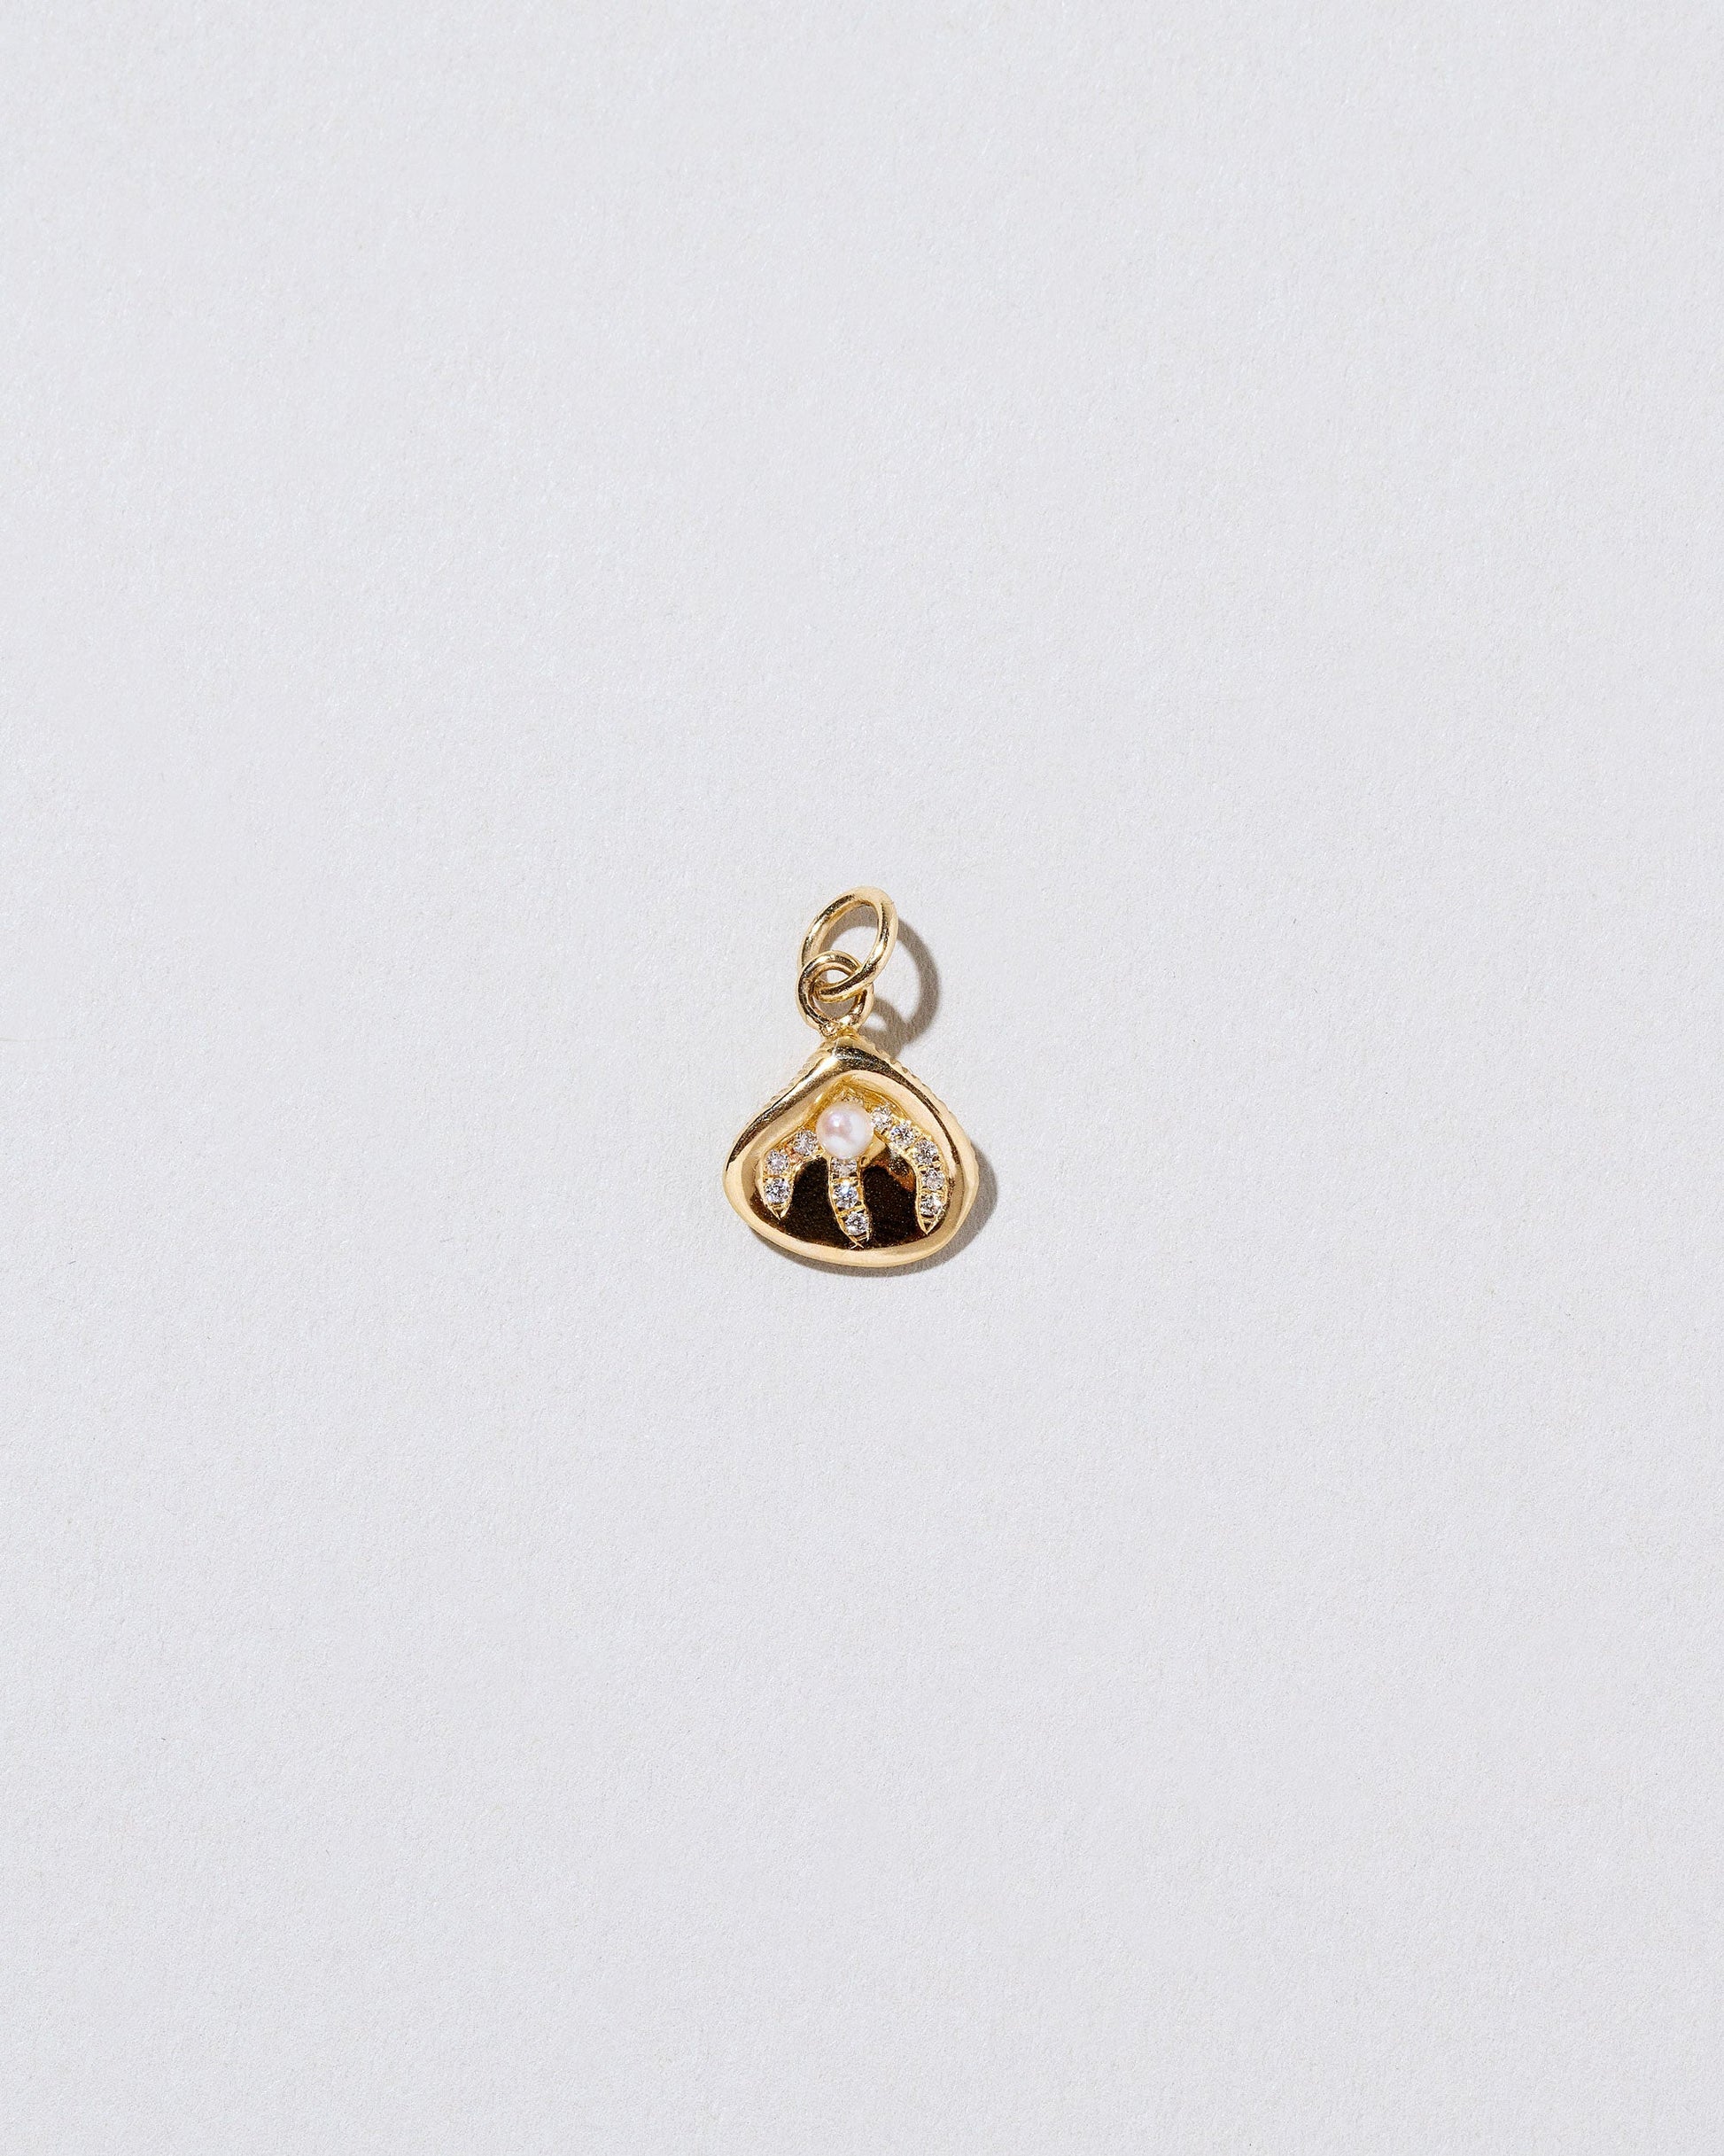  Clams Casino Charm on light color background.